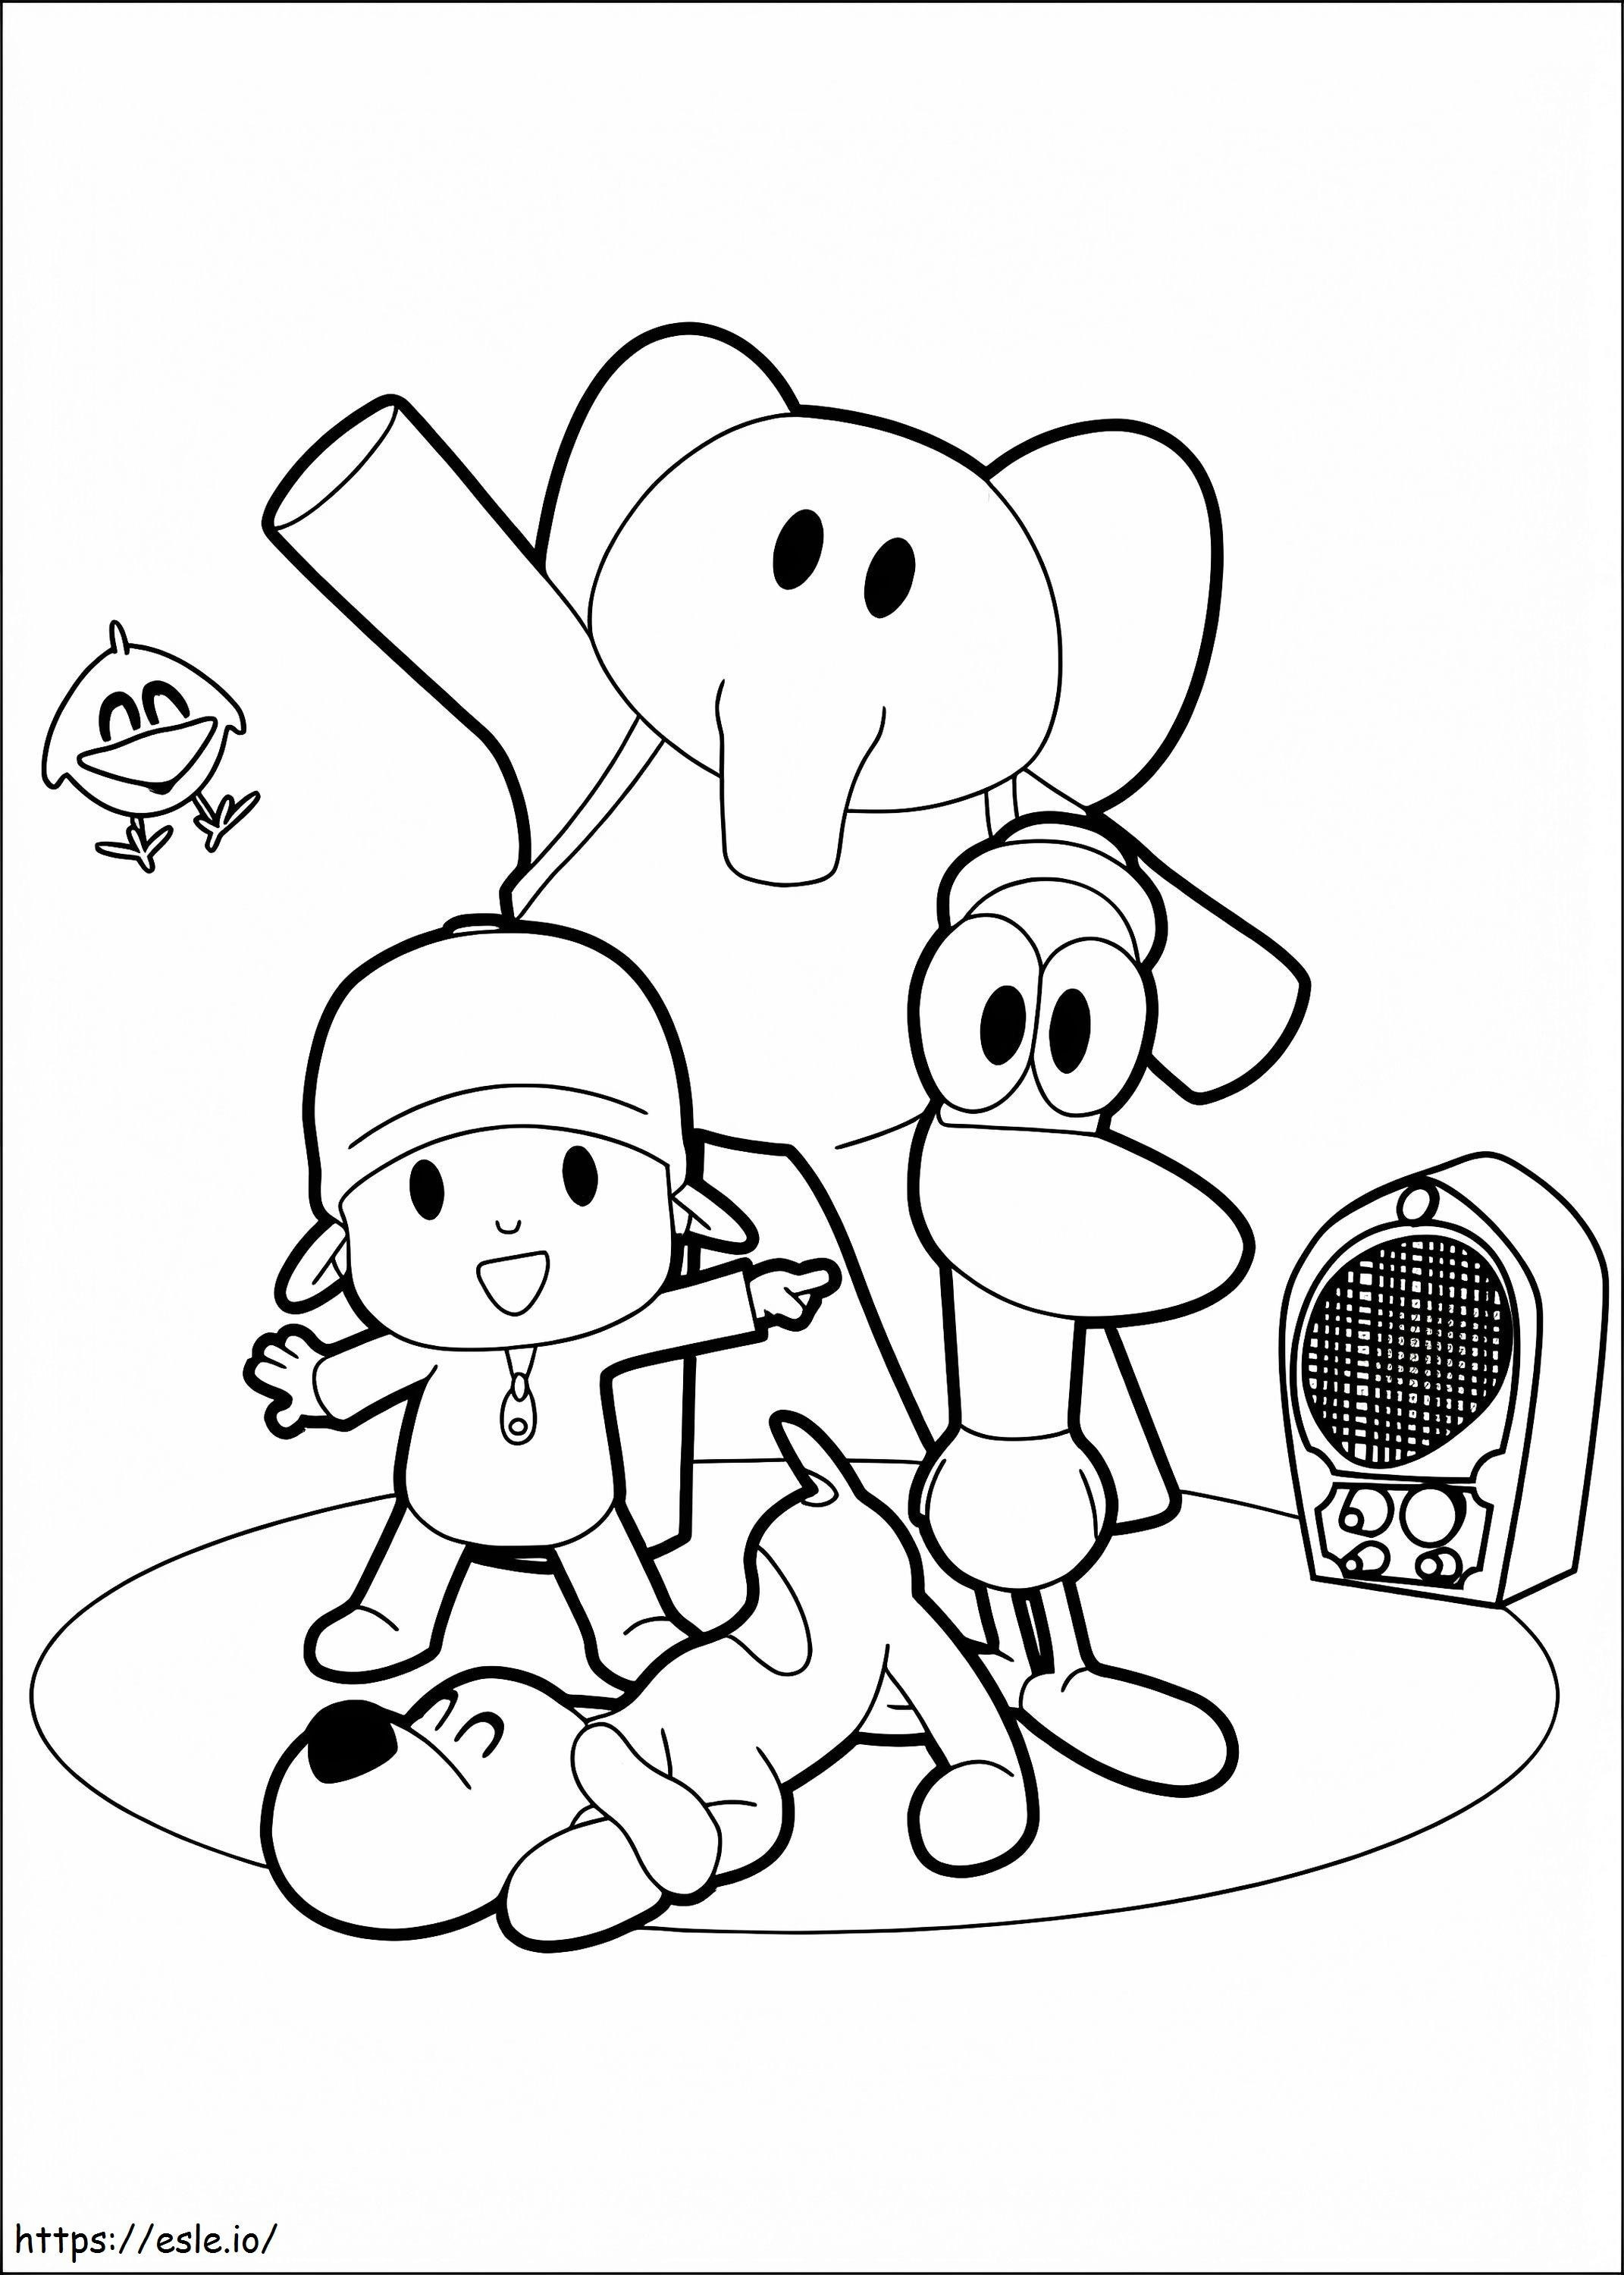 Happy Pocoyo With Friends coloring page